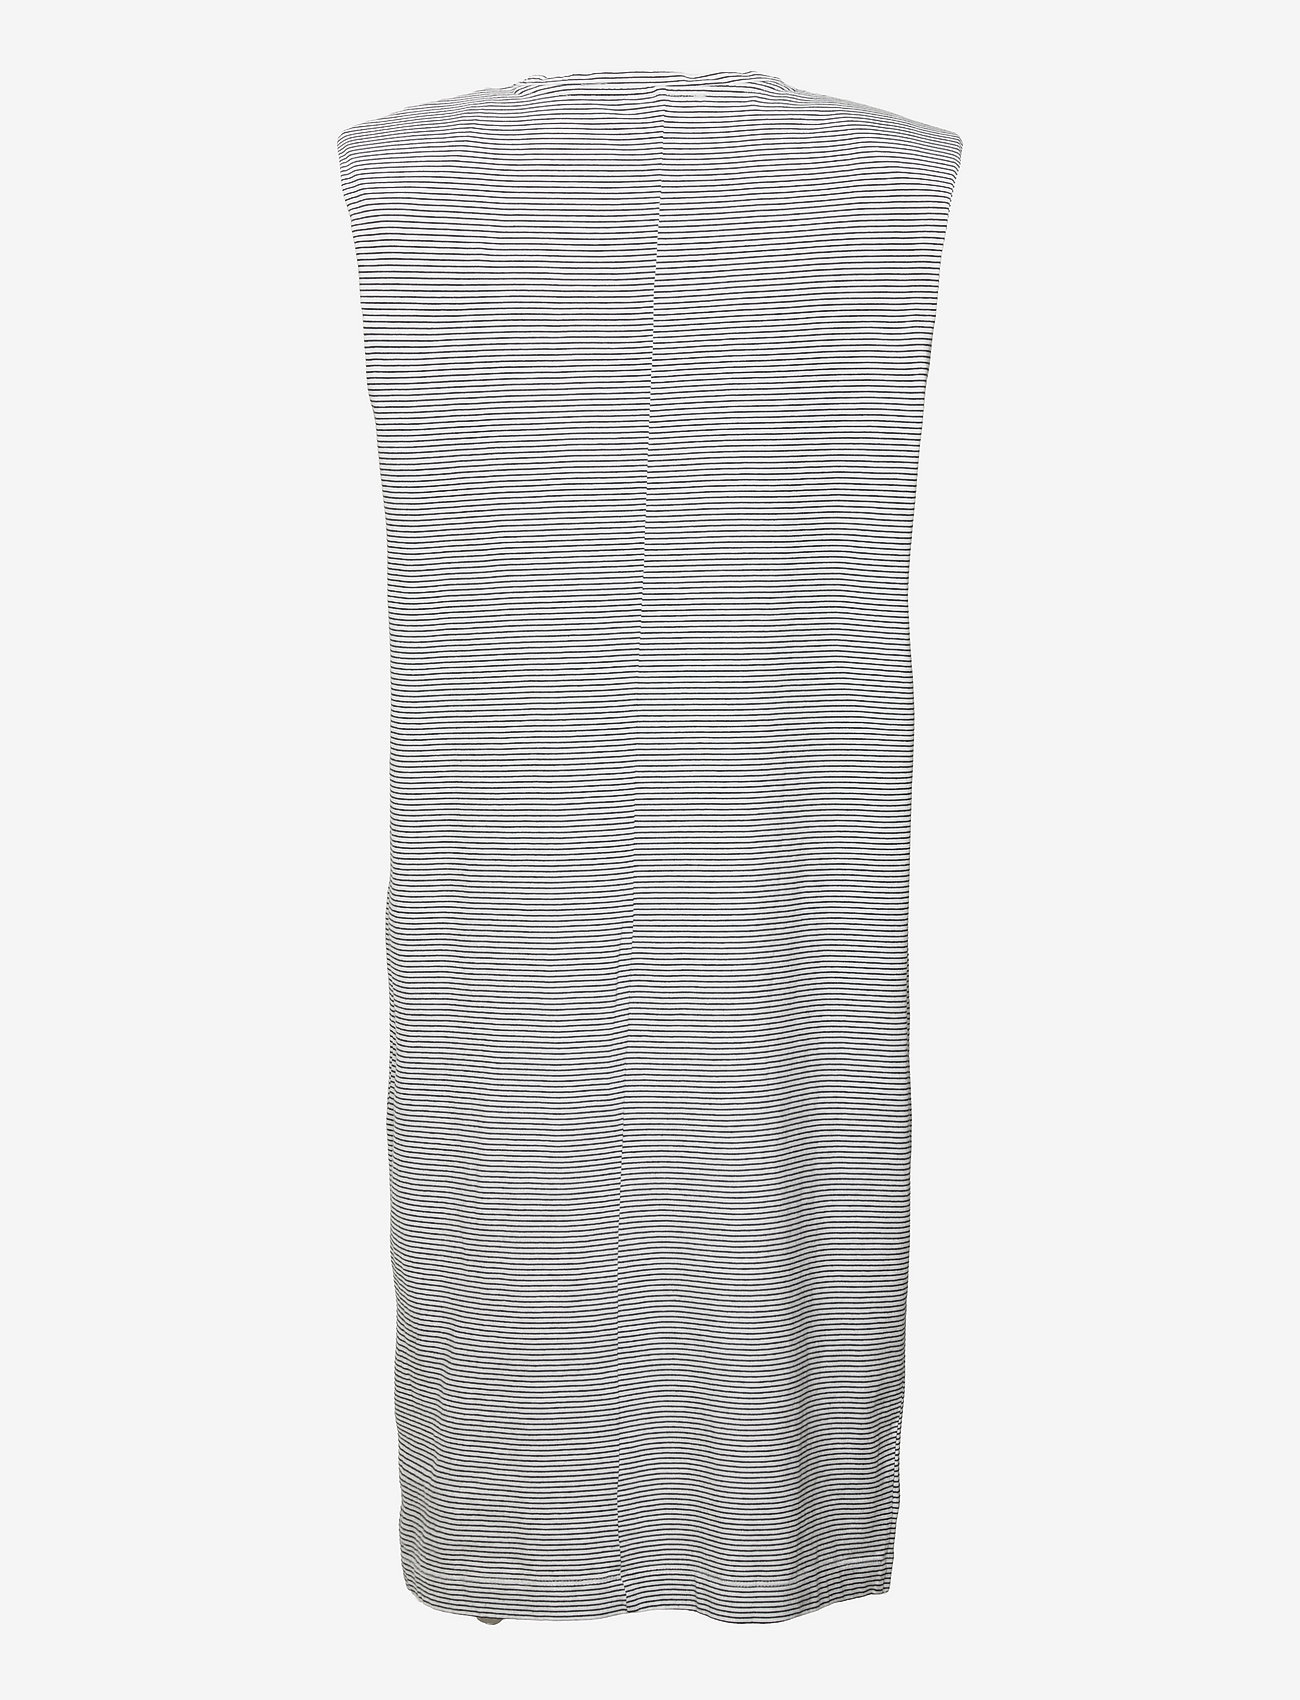 Esprit Collection - Jersey dress with shoulder pads - t-shirt-kleider - off white - 1